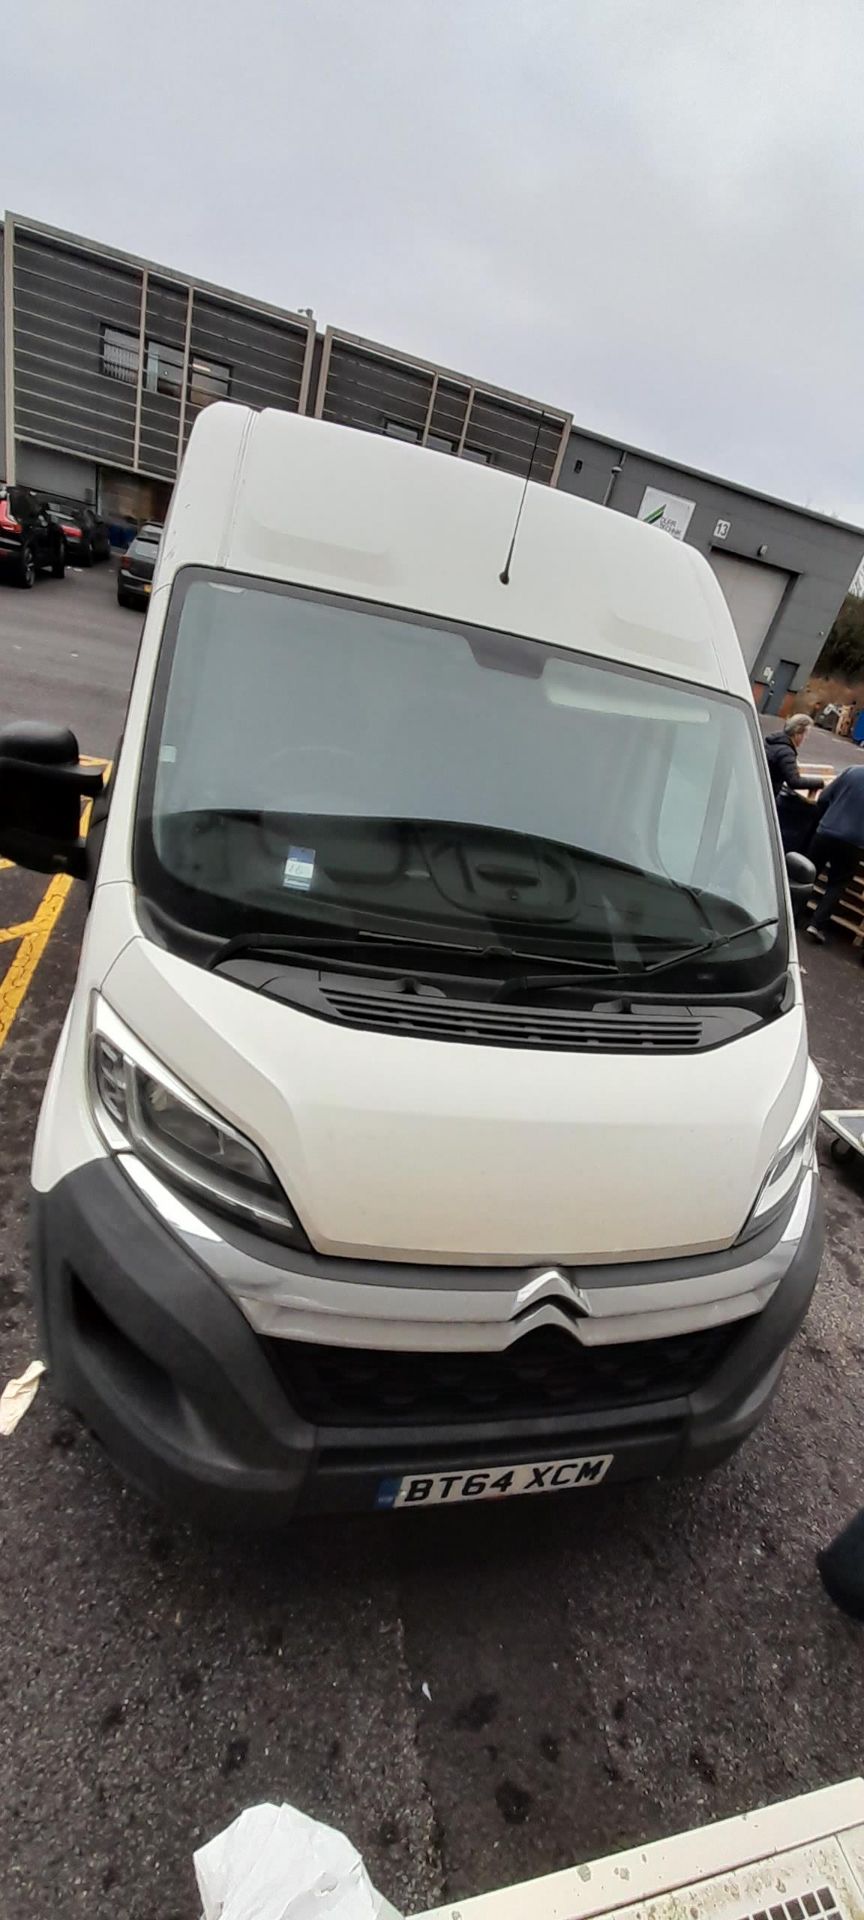 Citroen Relay Registration BT64 XCM, 104,109 miles - This vehicle does not have a V5C Document, the - Bild 6 aus 11